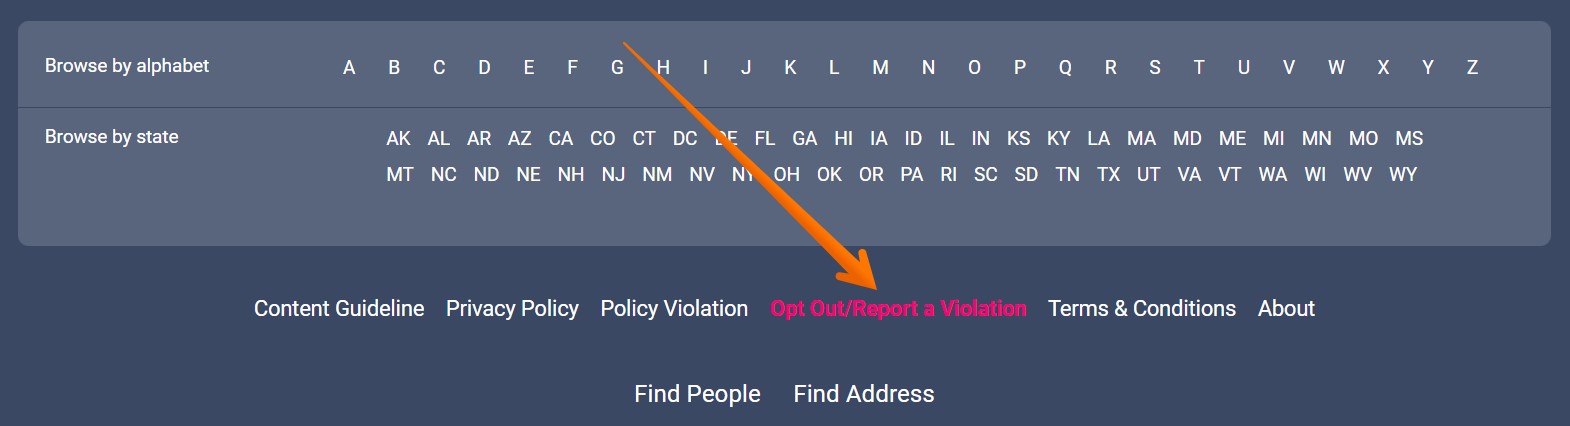 Then scroll down to the bottom of the page, find the ‘Opt Out/Report a Violation’ link, and follow it.